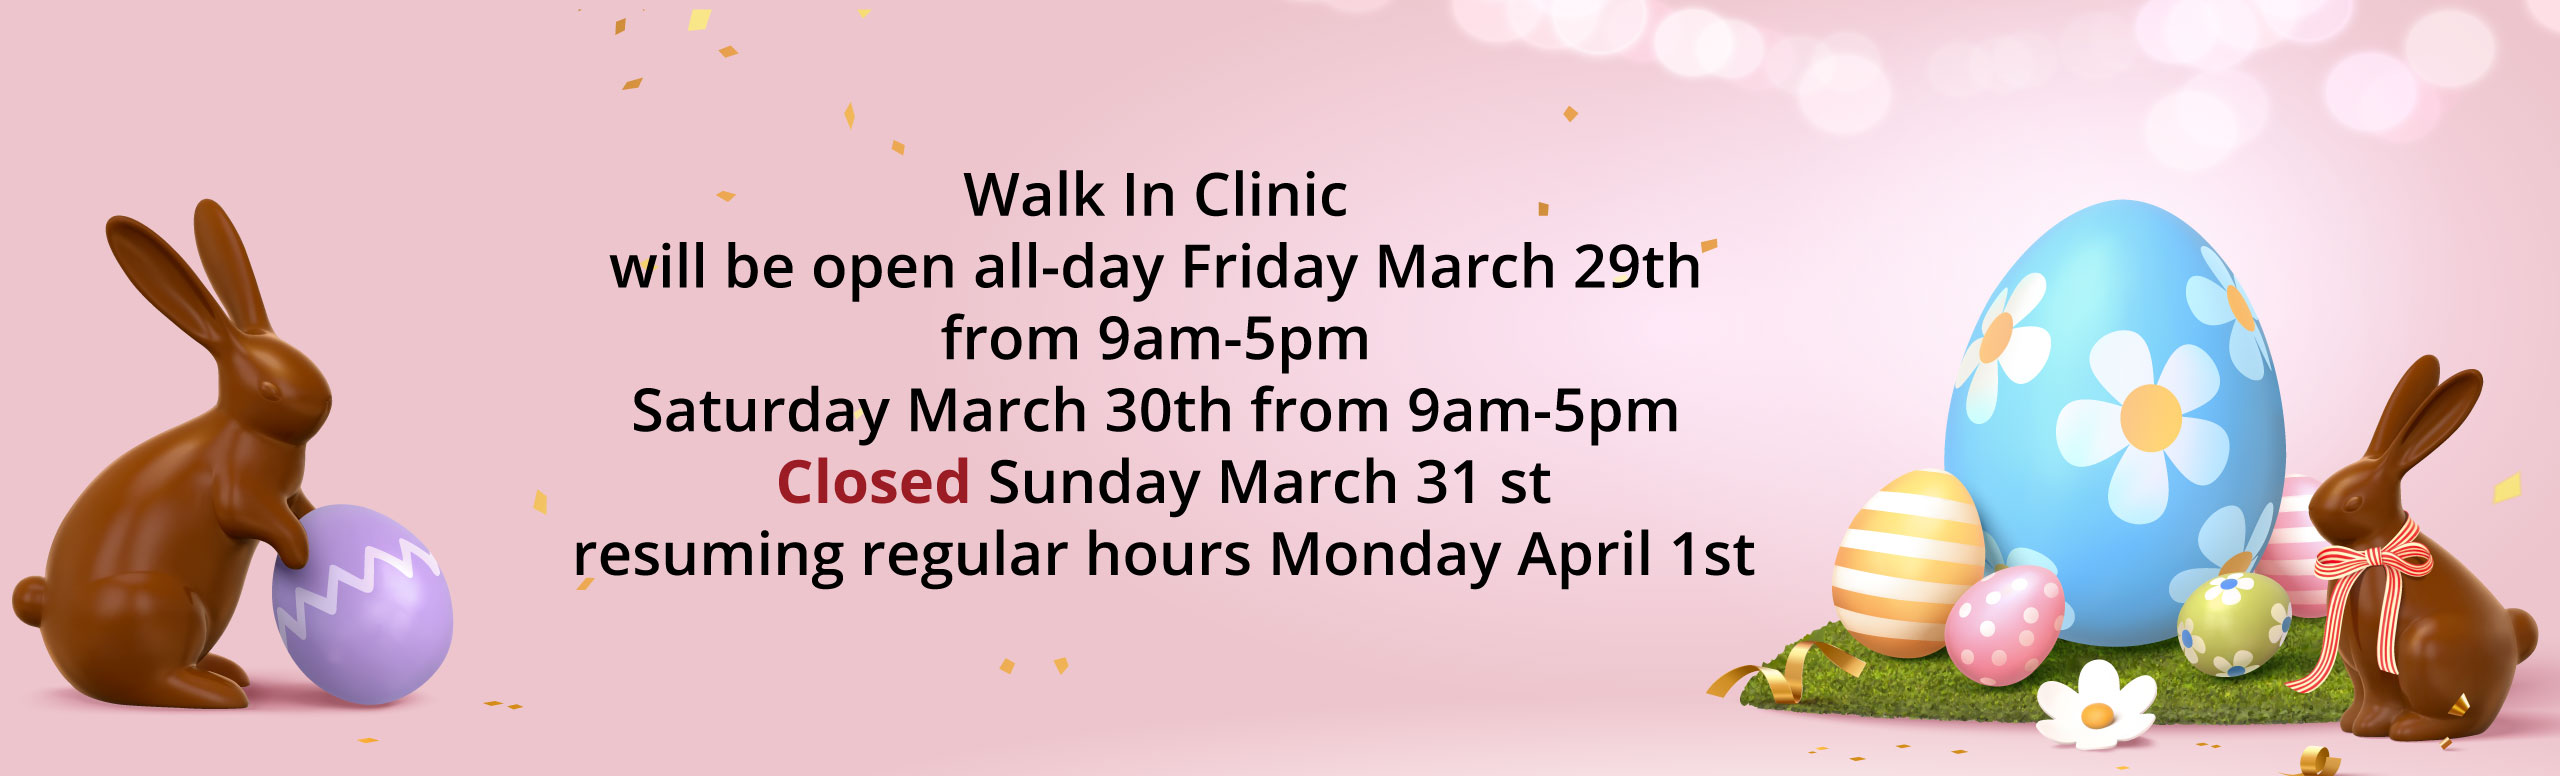 Walk In Clinic will be open all-day Friday March 29th from 9am-5pm Saturday March 30th from 9am-5pm Closed Sunday March 31st Resuming regular hours Monday April 1st